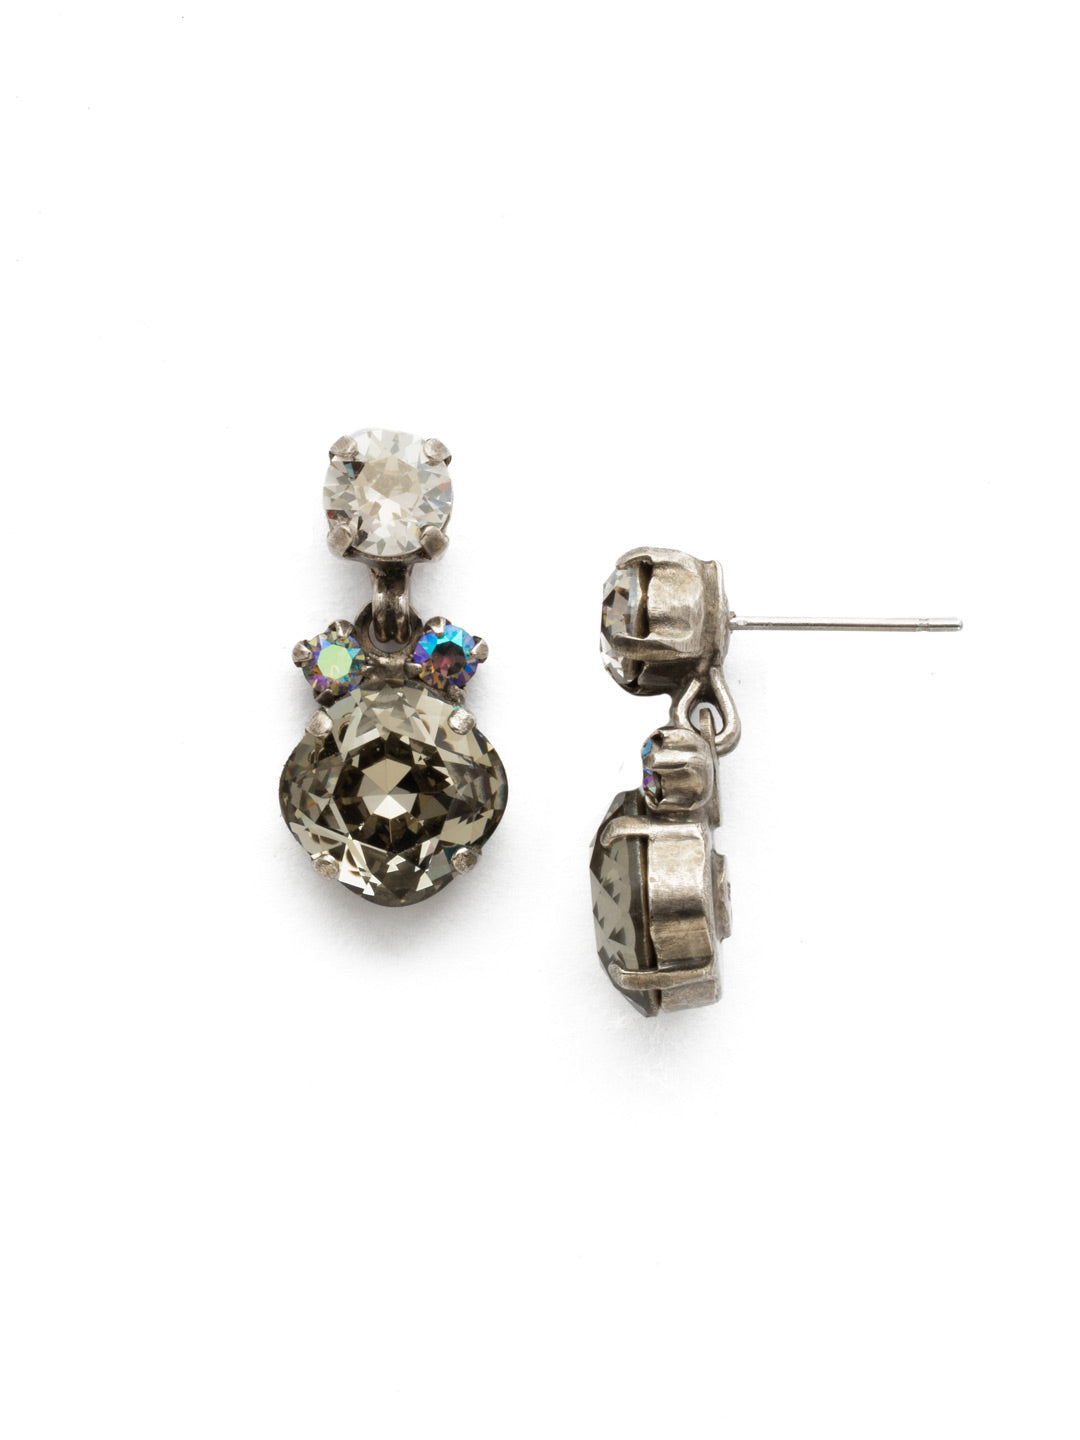 Balsam Dangle Earrings - EDQ15ASCRO - <p>A pretty pattern of cushion cut and round crystals. Vintage-inspired styling at its finest! From Sorrelli's Crystal Rock collection in our Antique Silver-tone finish.</p>